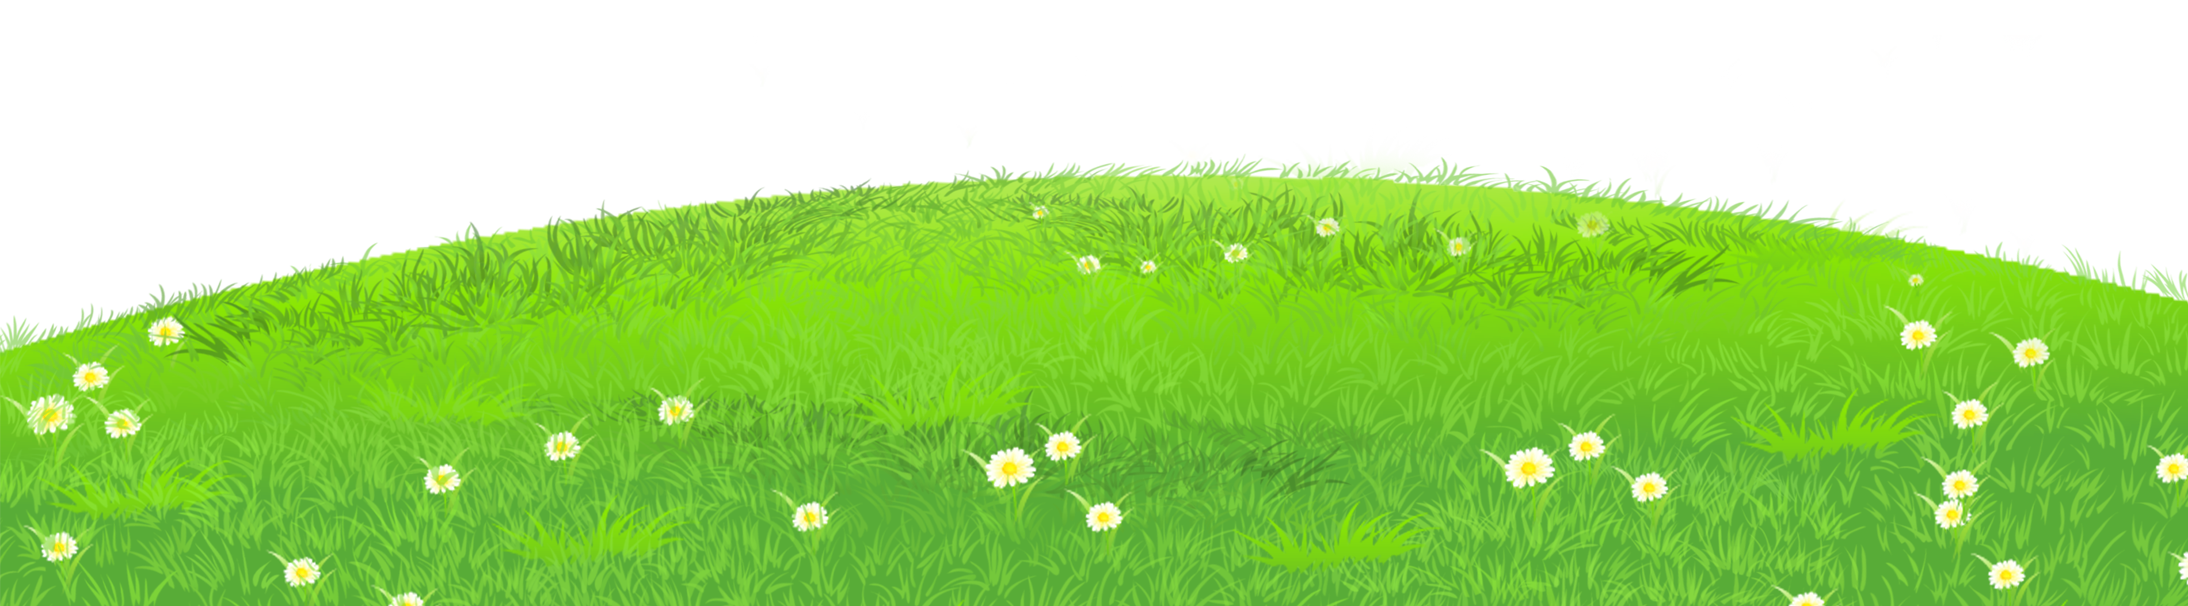 free clipart grass and flowers - photo #43